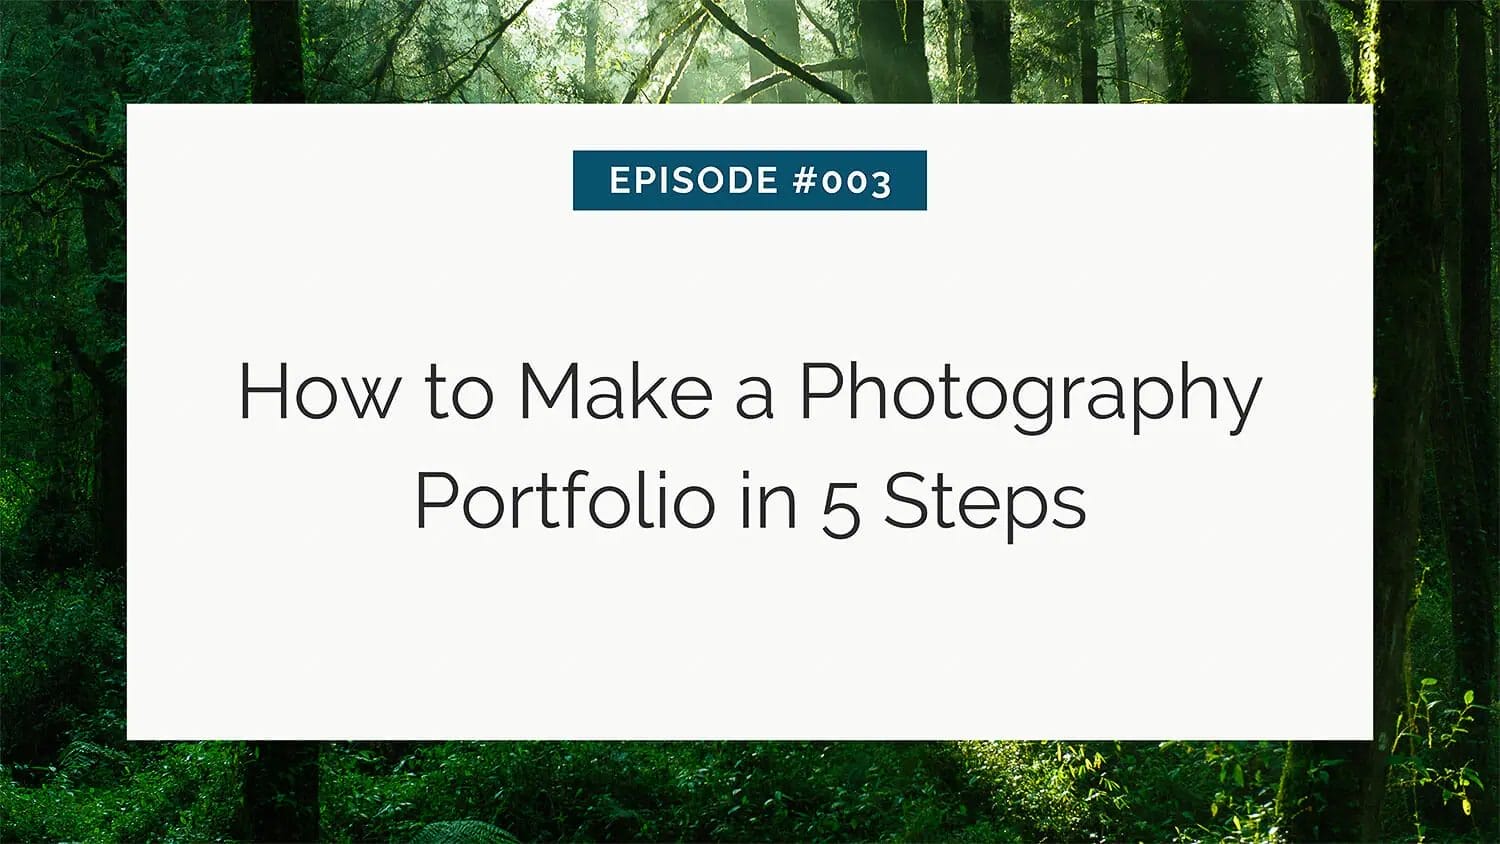 A title slide for episode #003 on creating a photography portfolio in five steps, set against a forest backdrop.